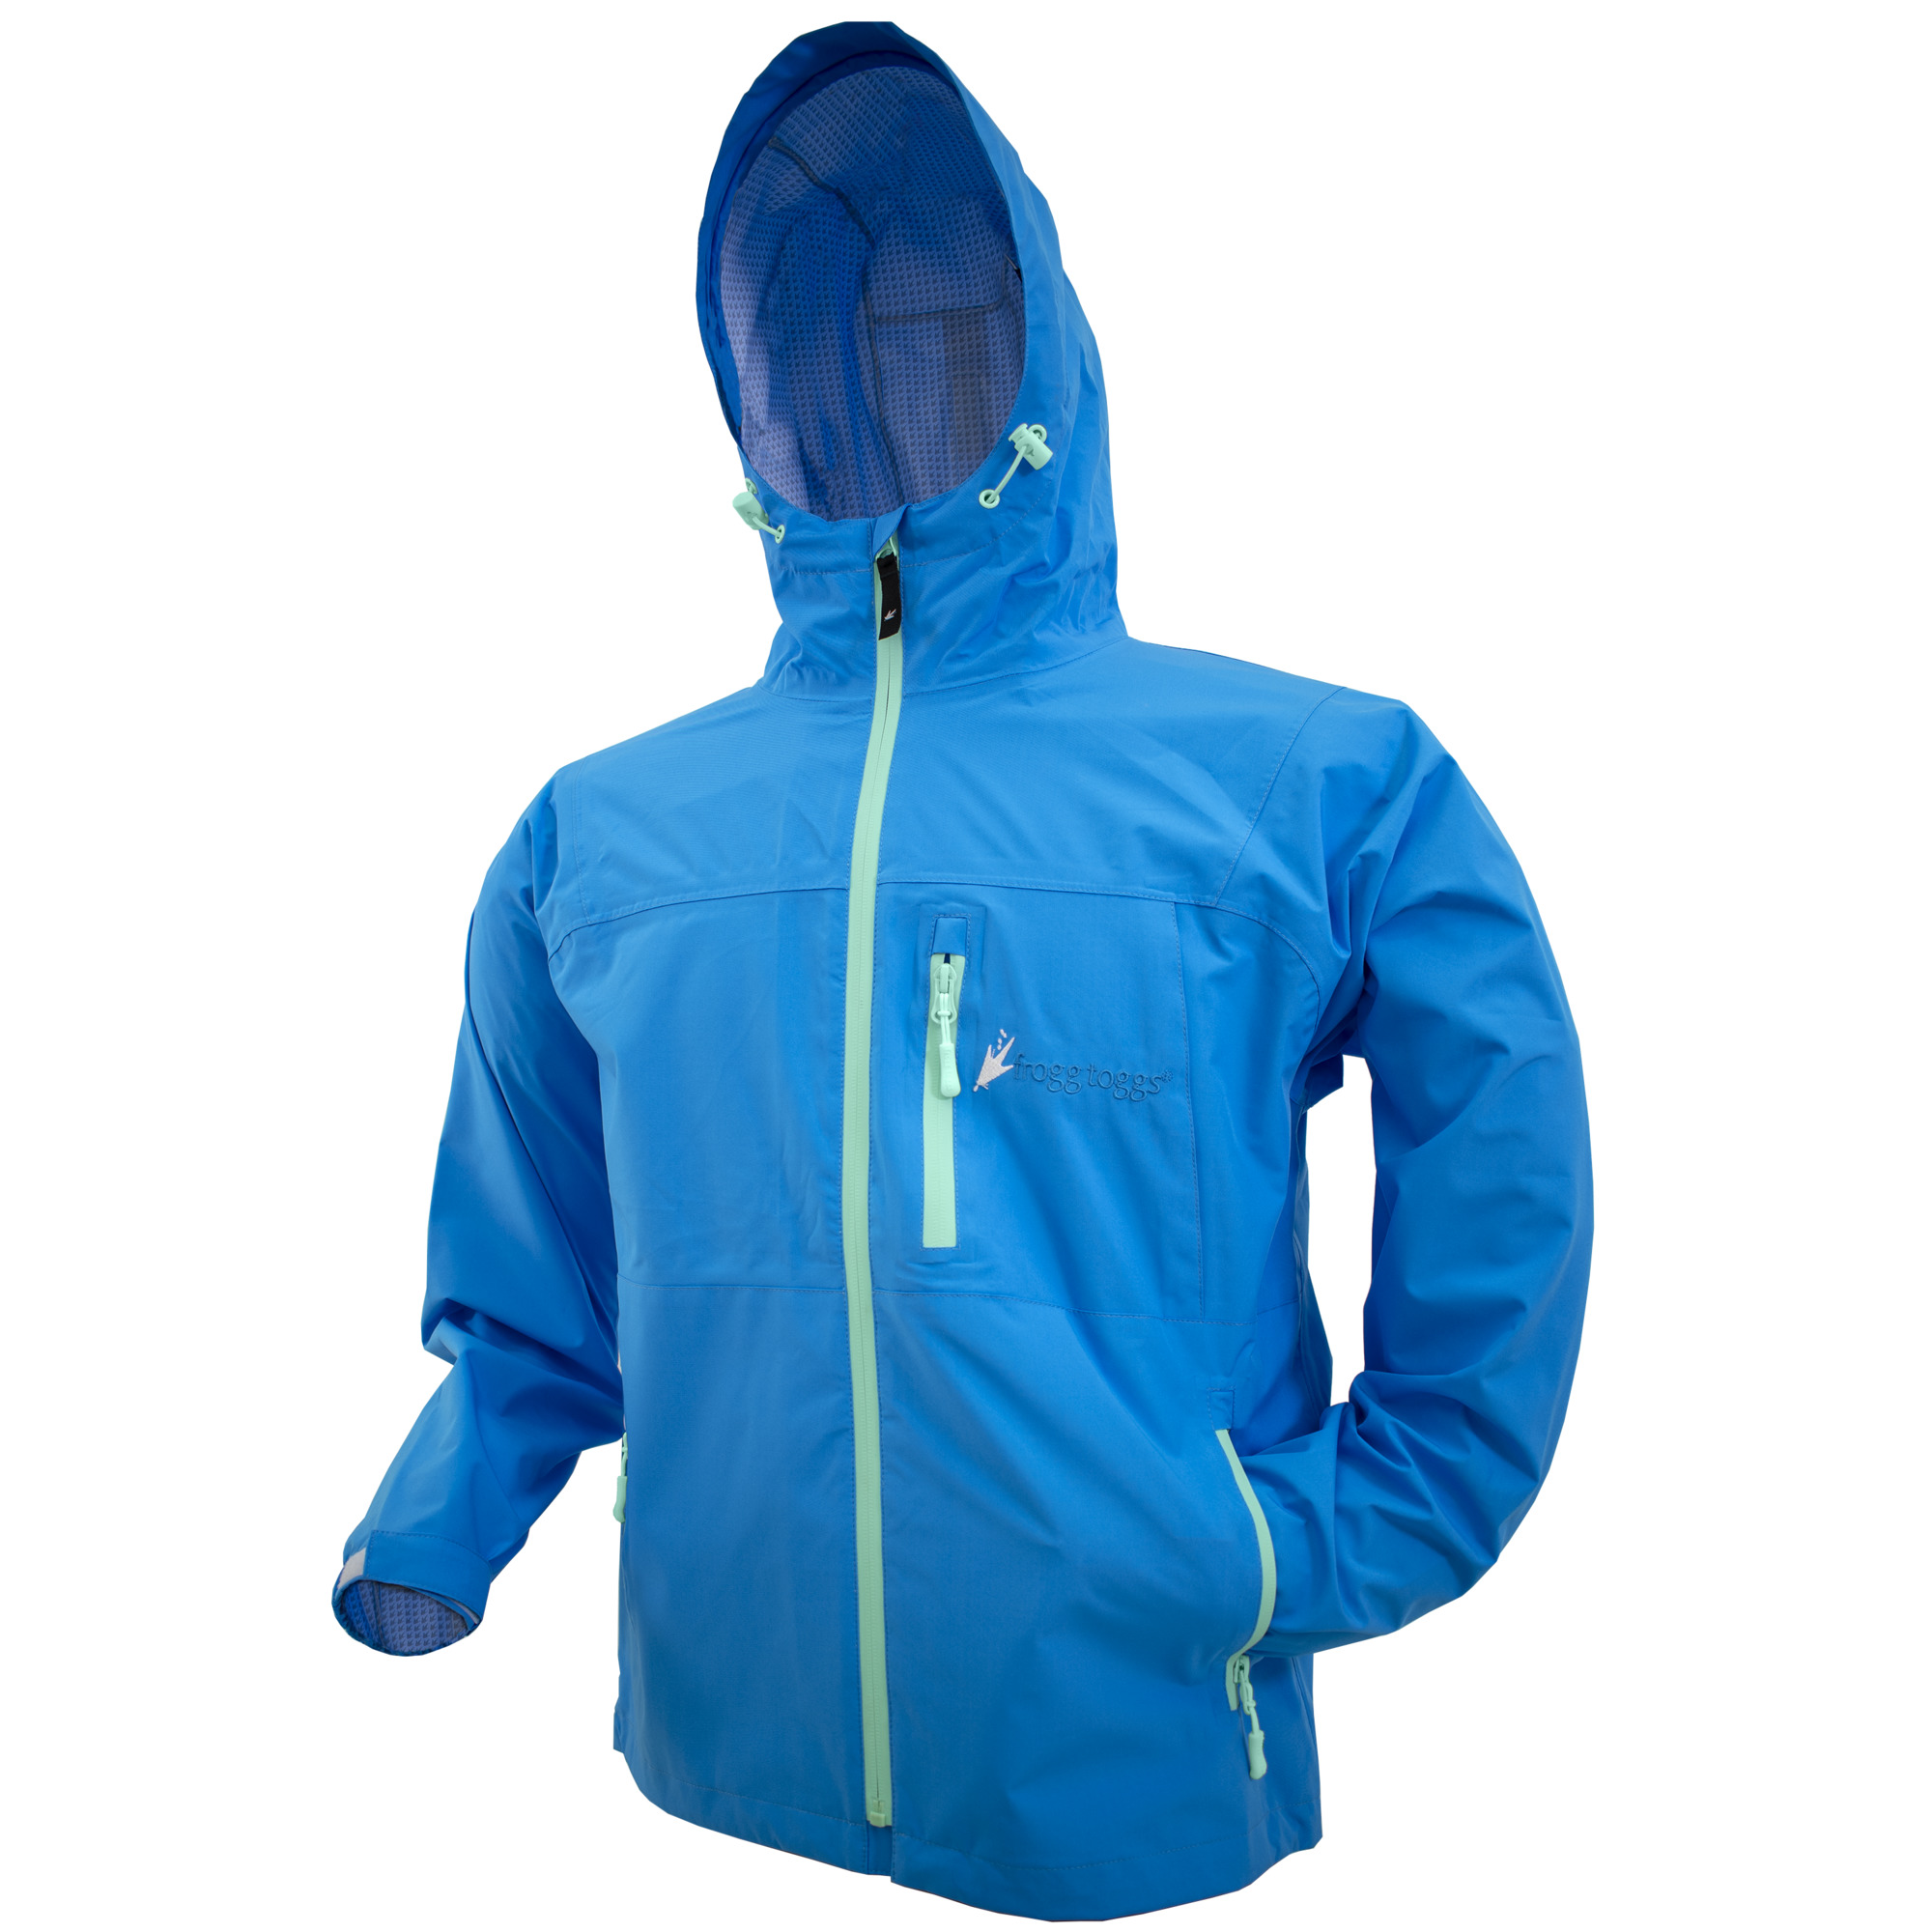 frogg toggs, Java Toadz 2.5 Jacket, Size M, Color Electric Blue